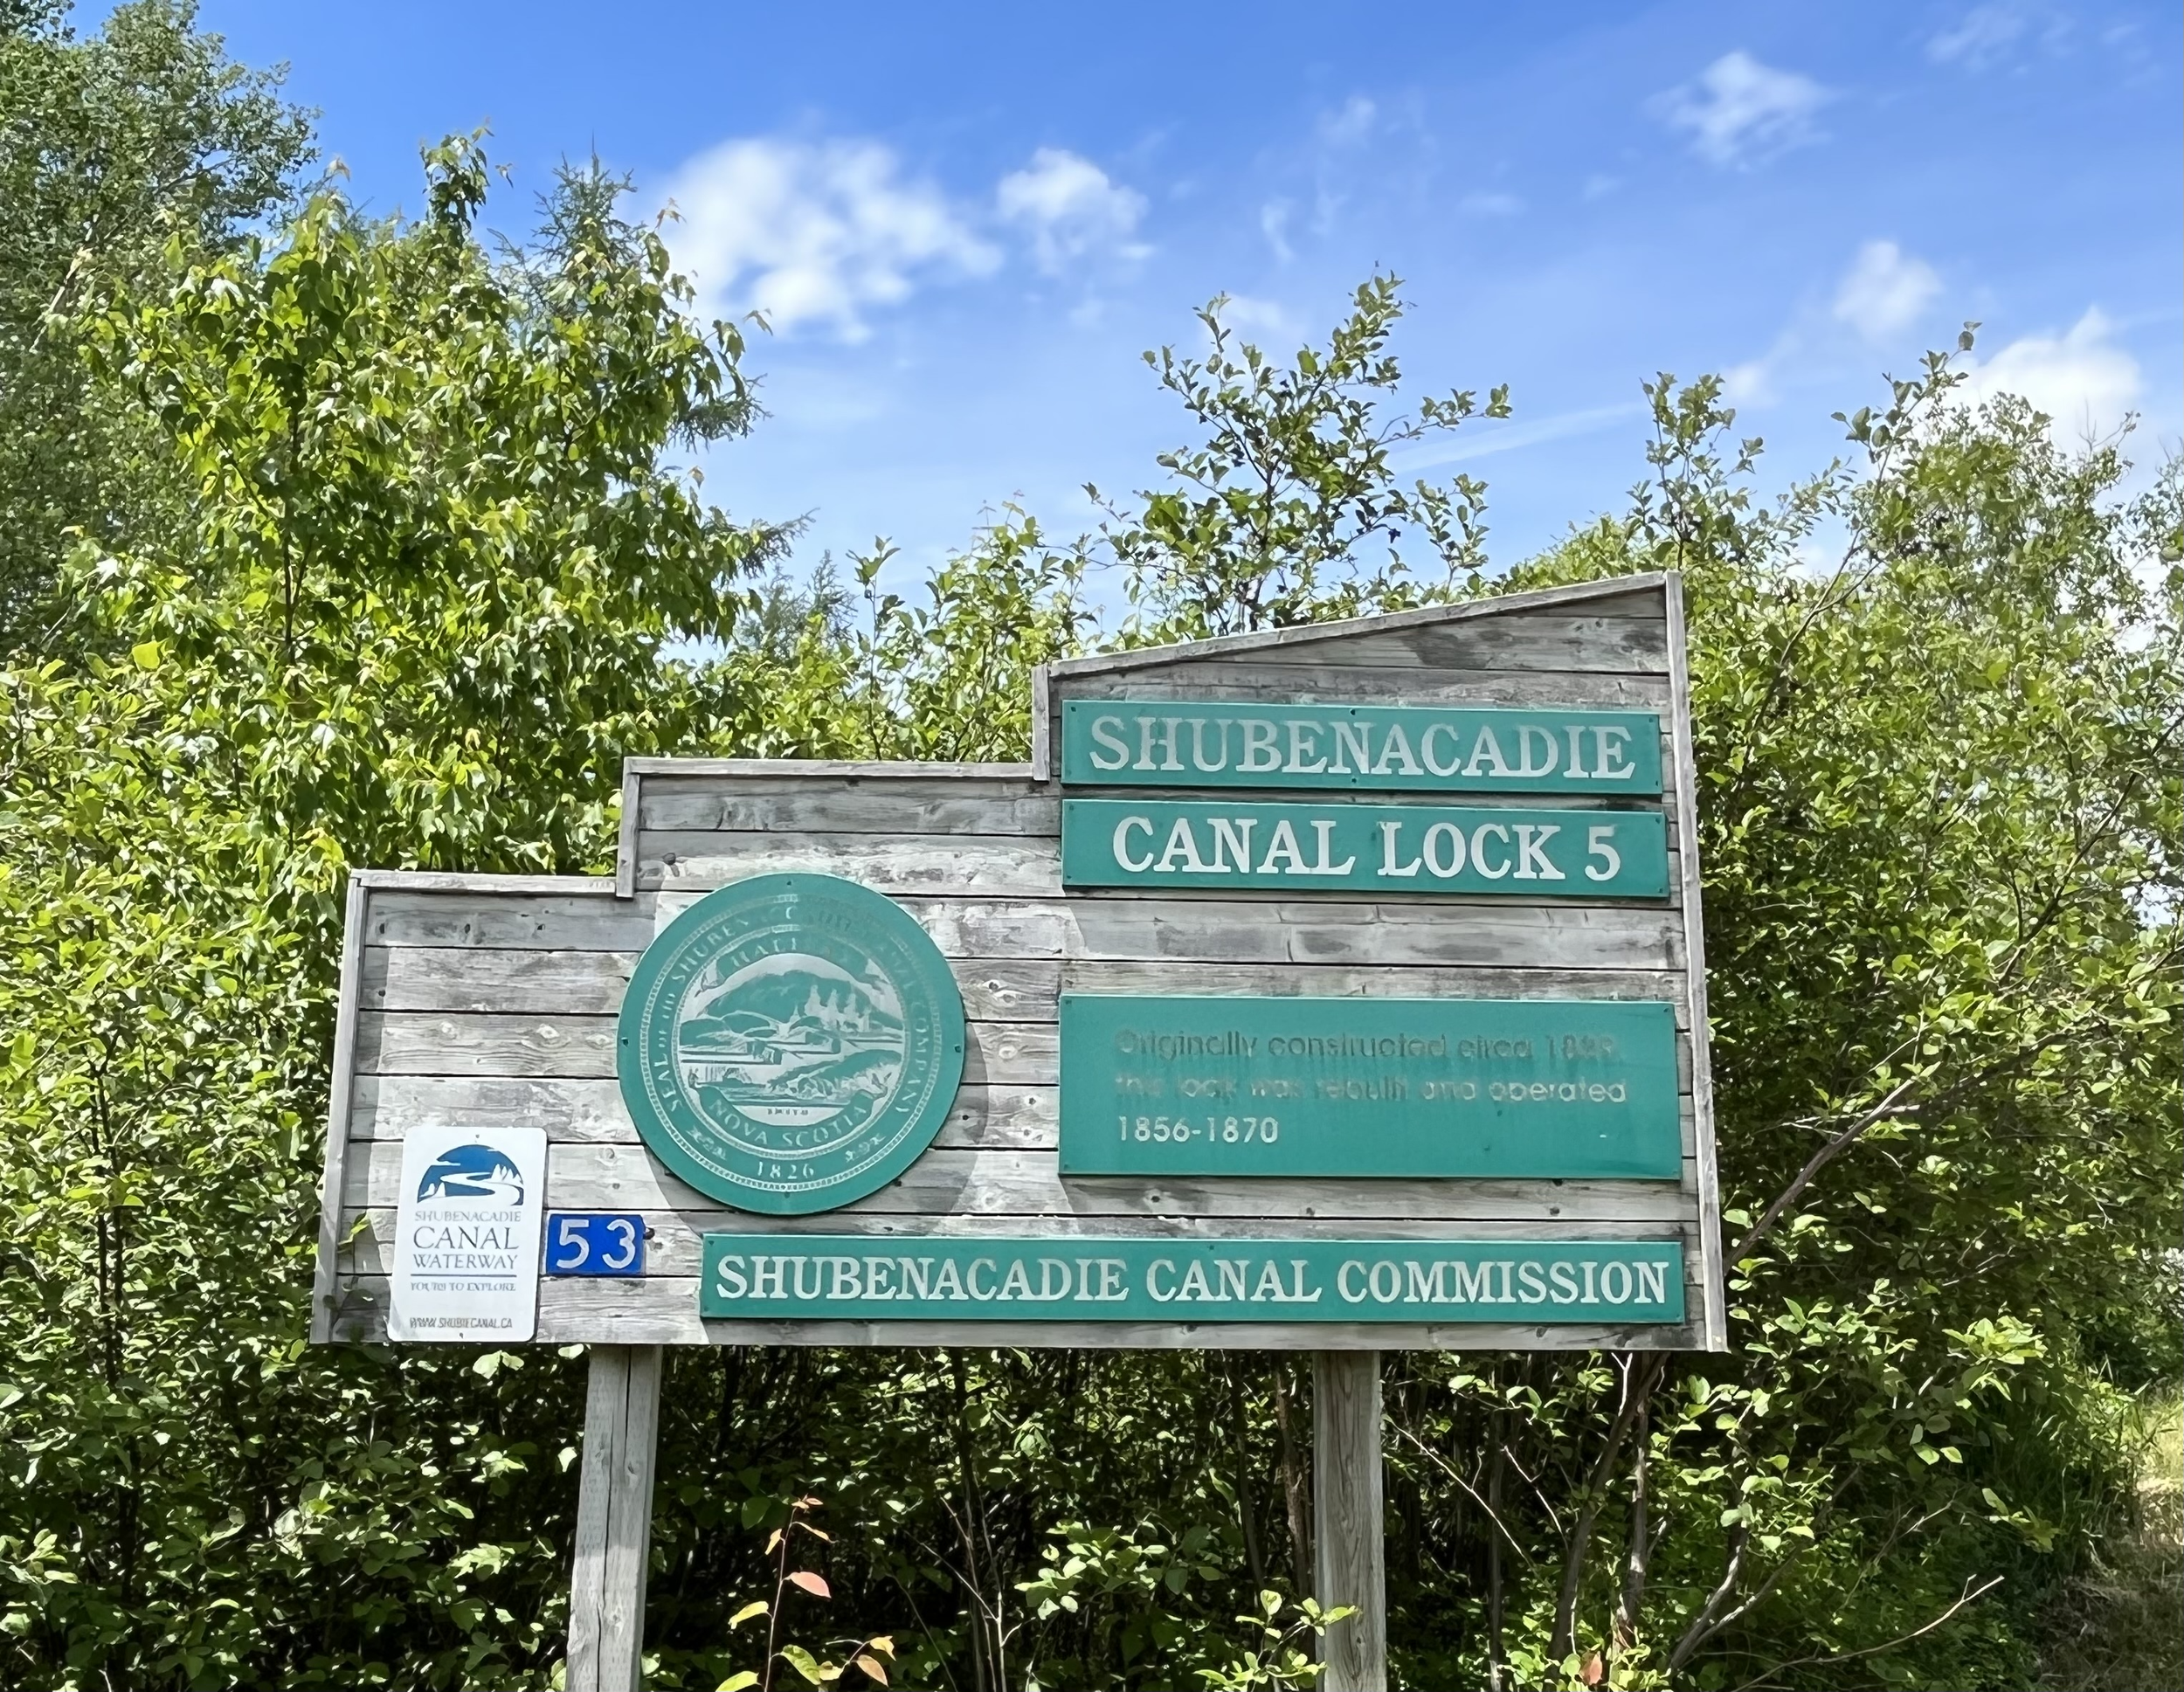 Canal Lock 5 entrance sign.